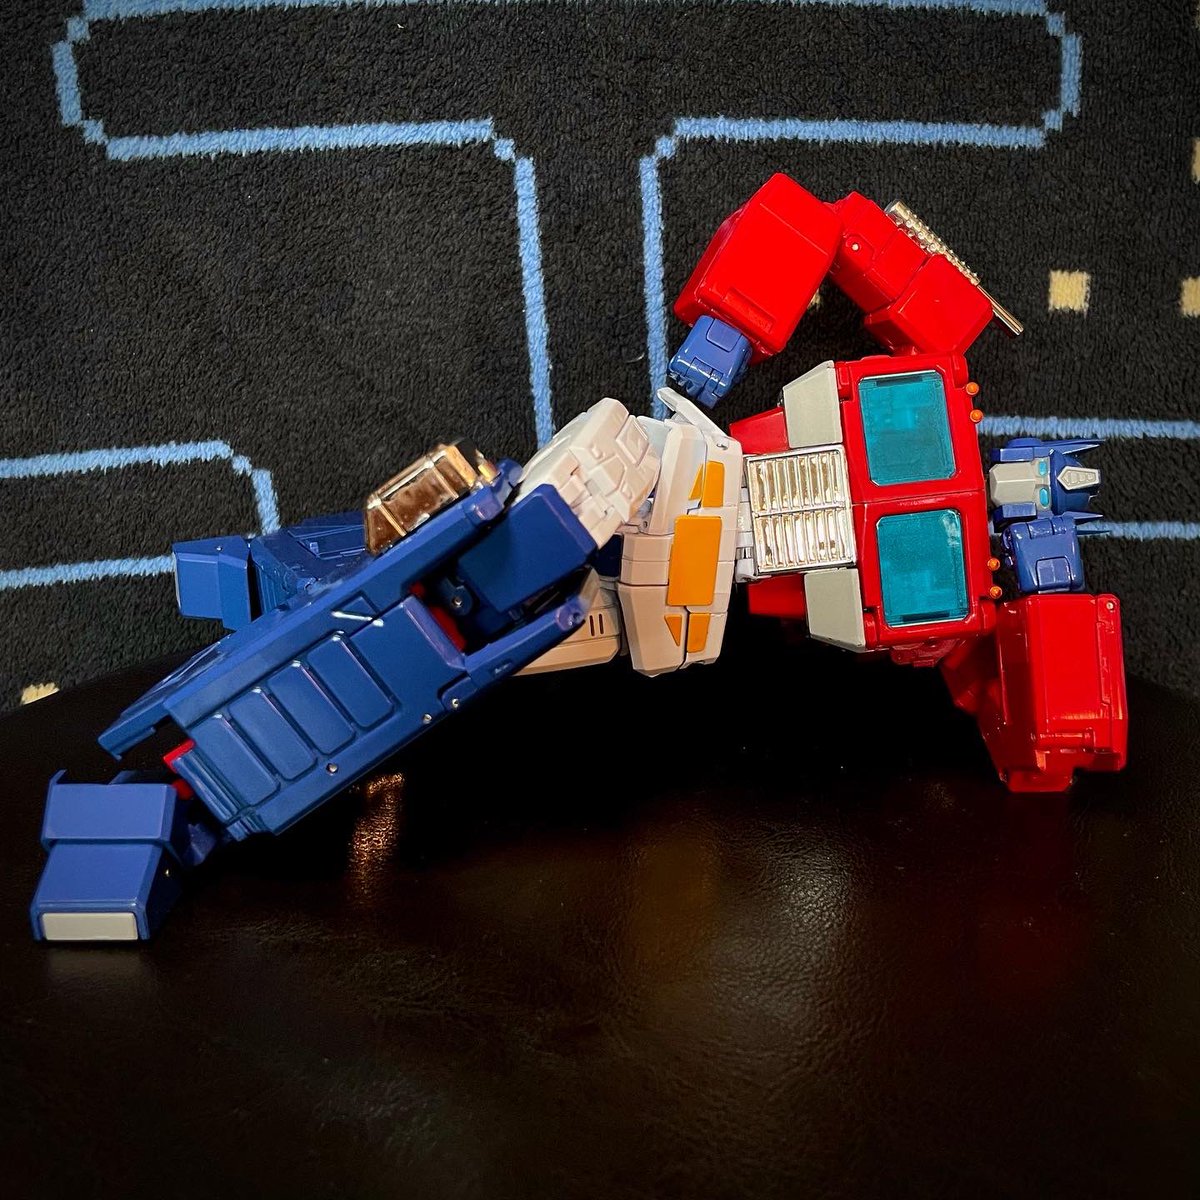 Is this already played out? 😅

#Transformers #toys #OptimusPrime #PeterCullen #homage #Autobots #meme #Takaratomy #80scartoons